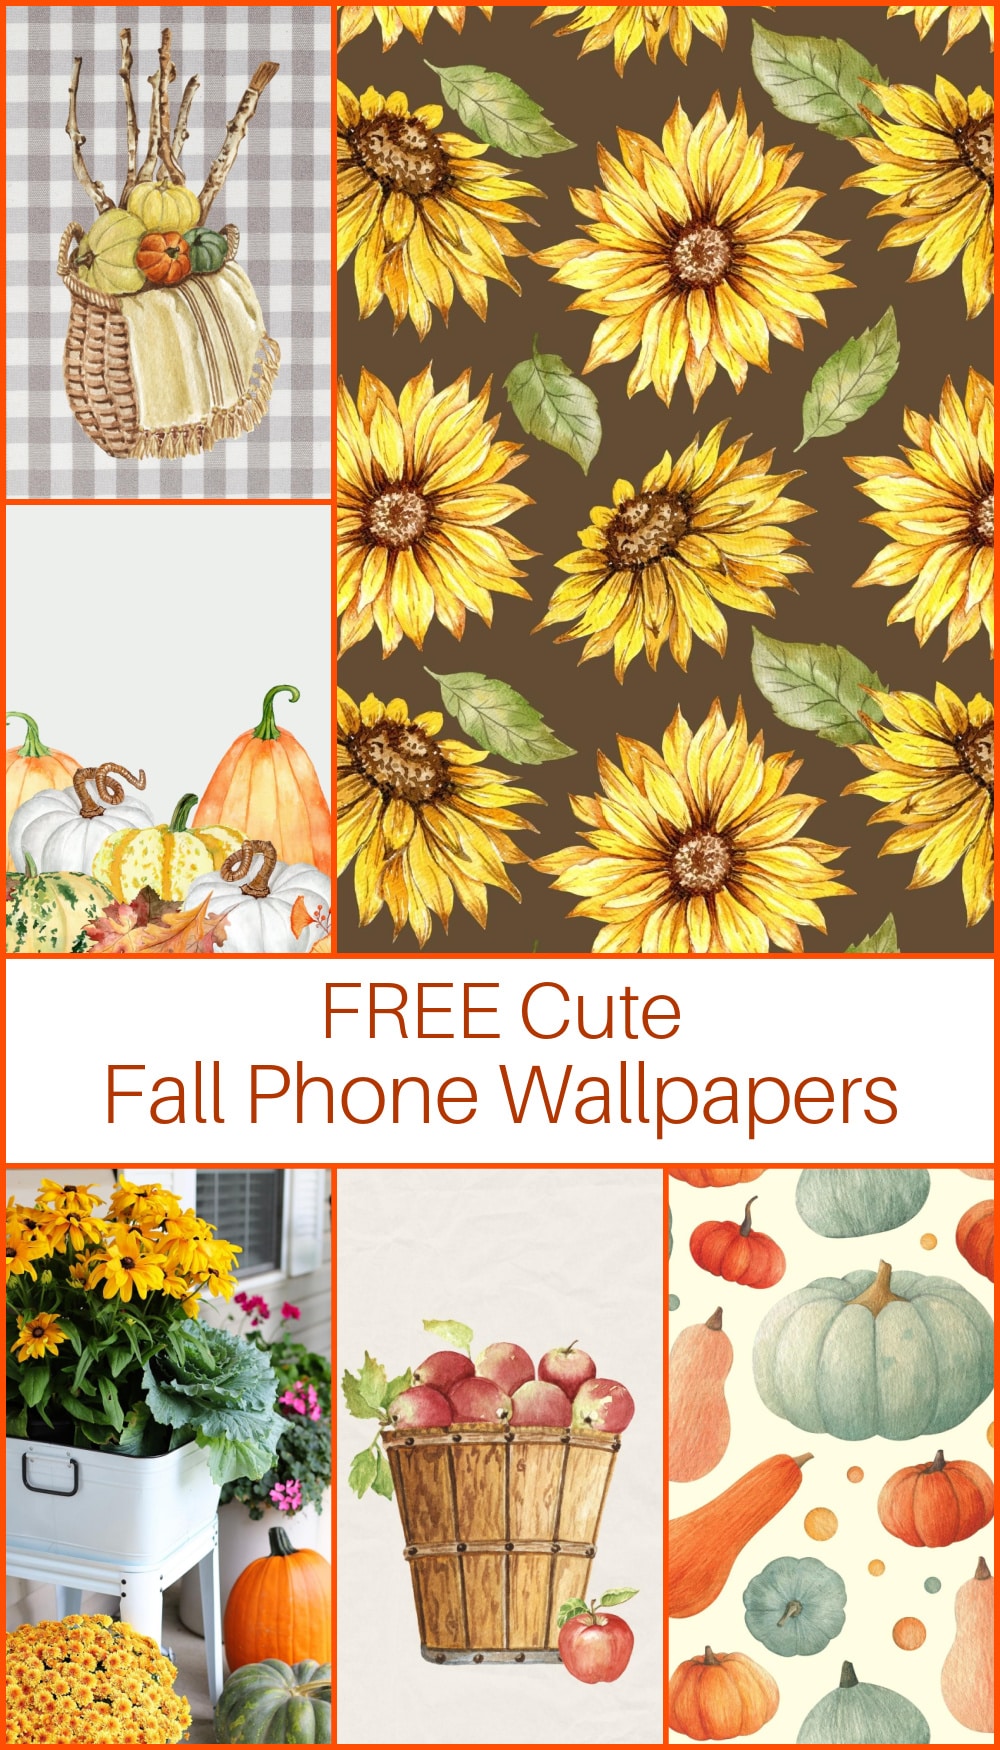 Fall iPhone Wallpaper Backgrounds - Free To Download